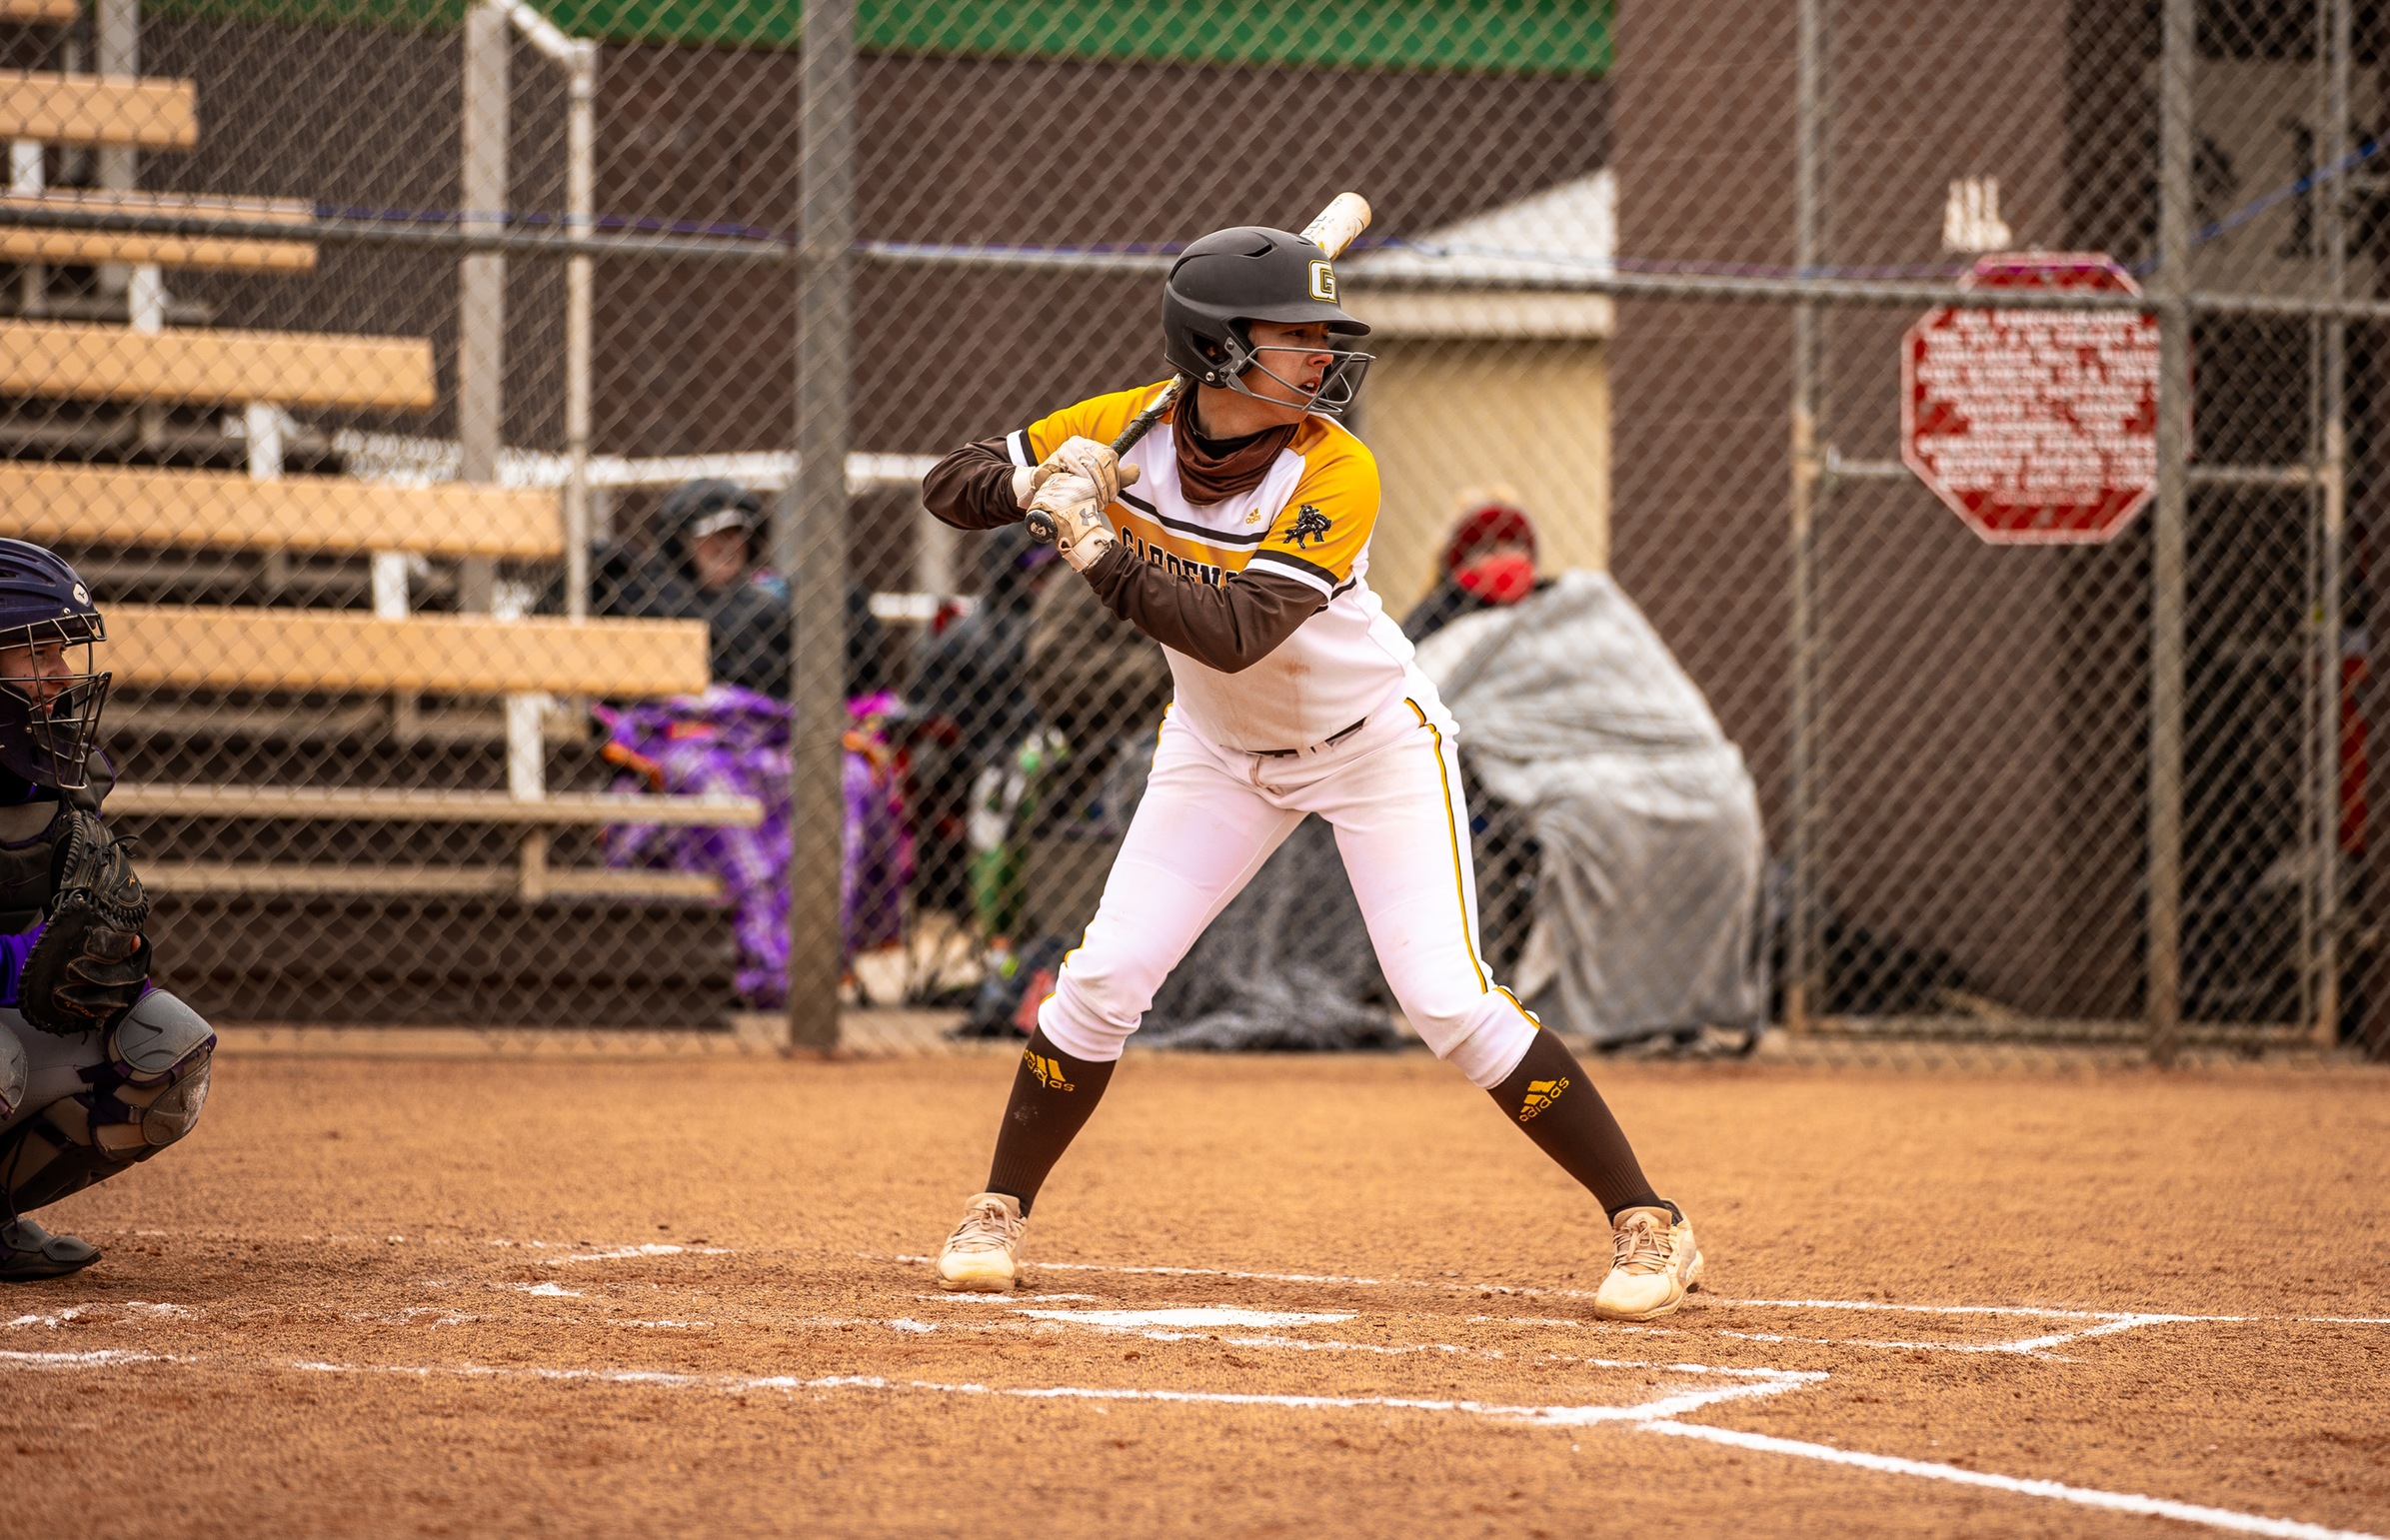 Broncbusters fall to Barton in Region VI elimination game